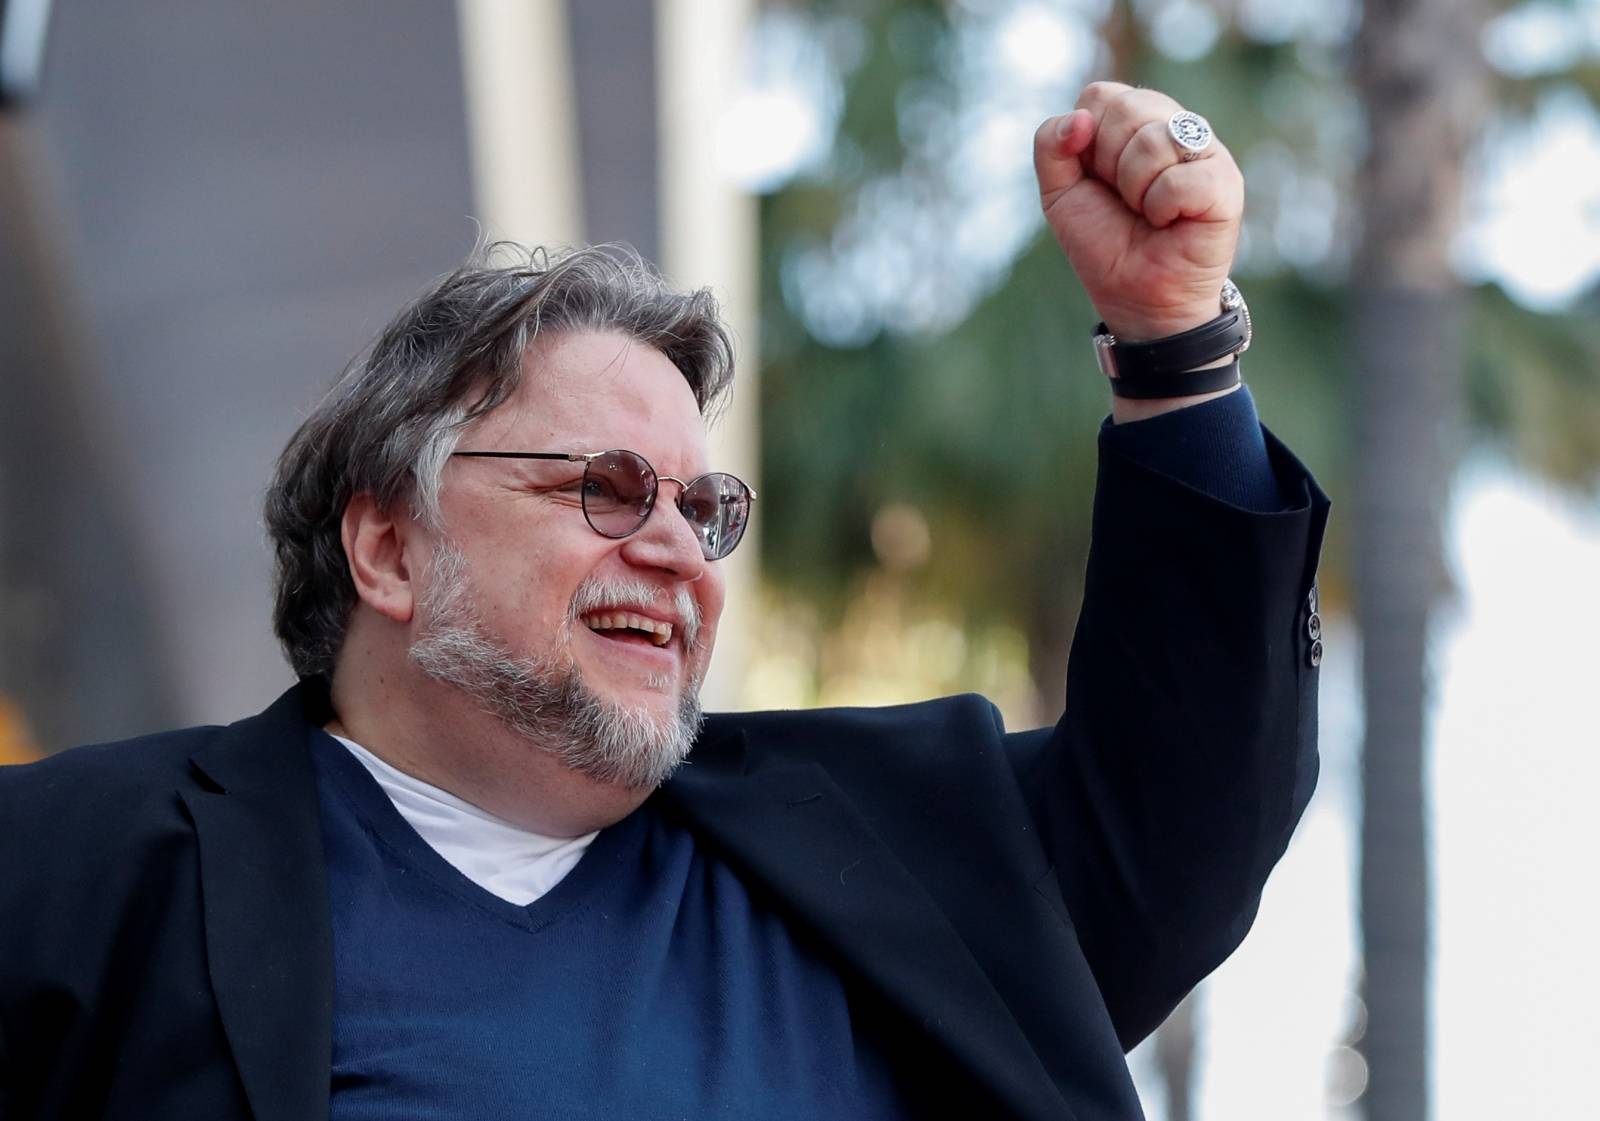 Guillermo del Toro receives a star on the Hollywood Walk of Fame in Los Angeles